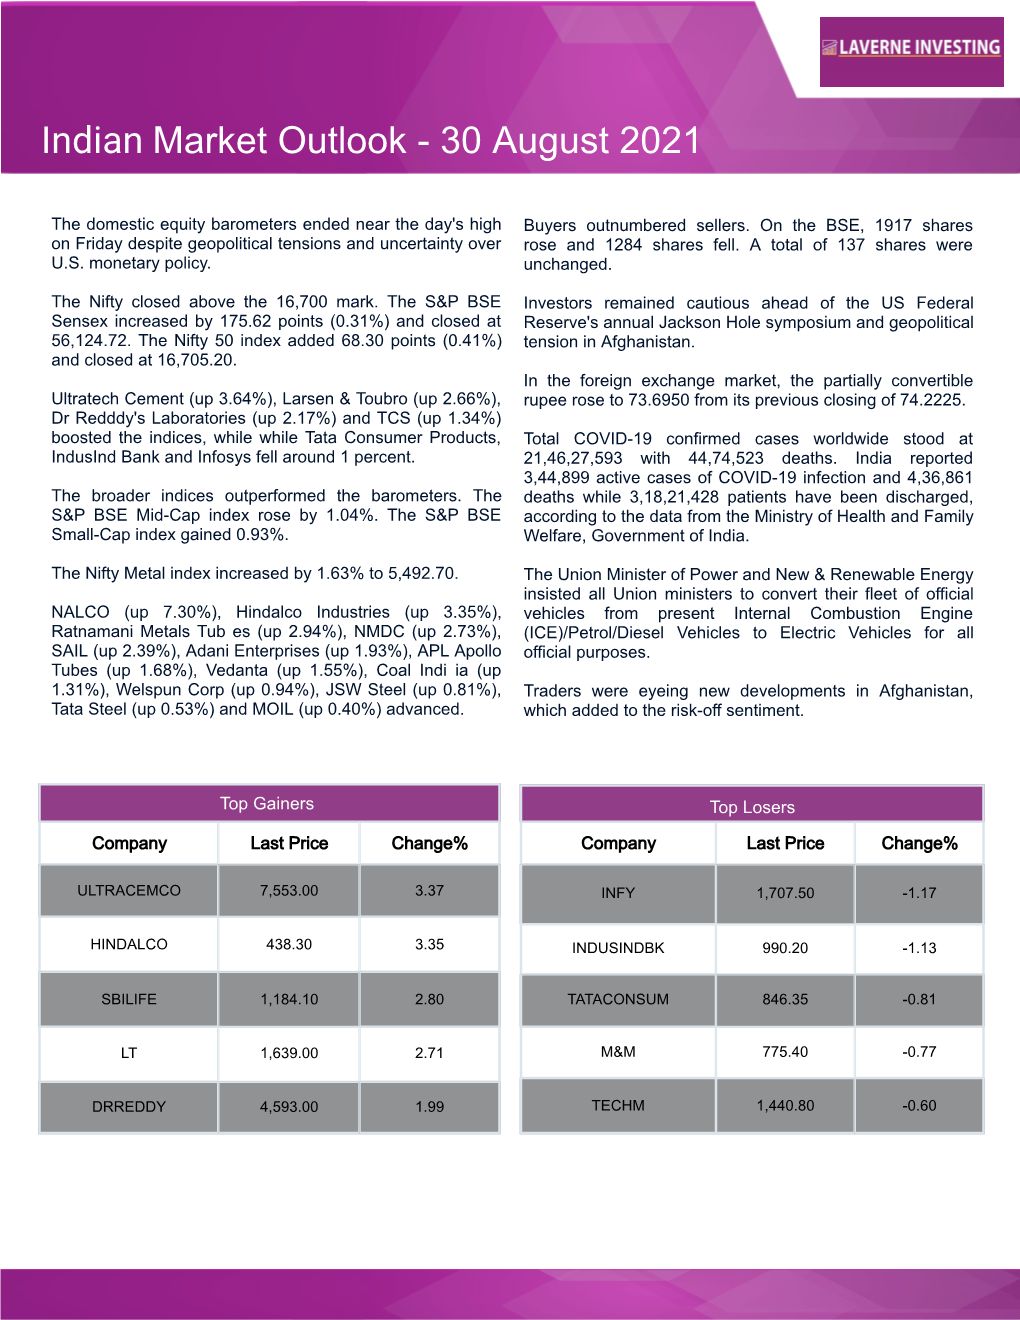 Indian Market Outlook- 30 August 2021